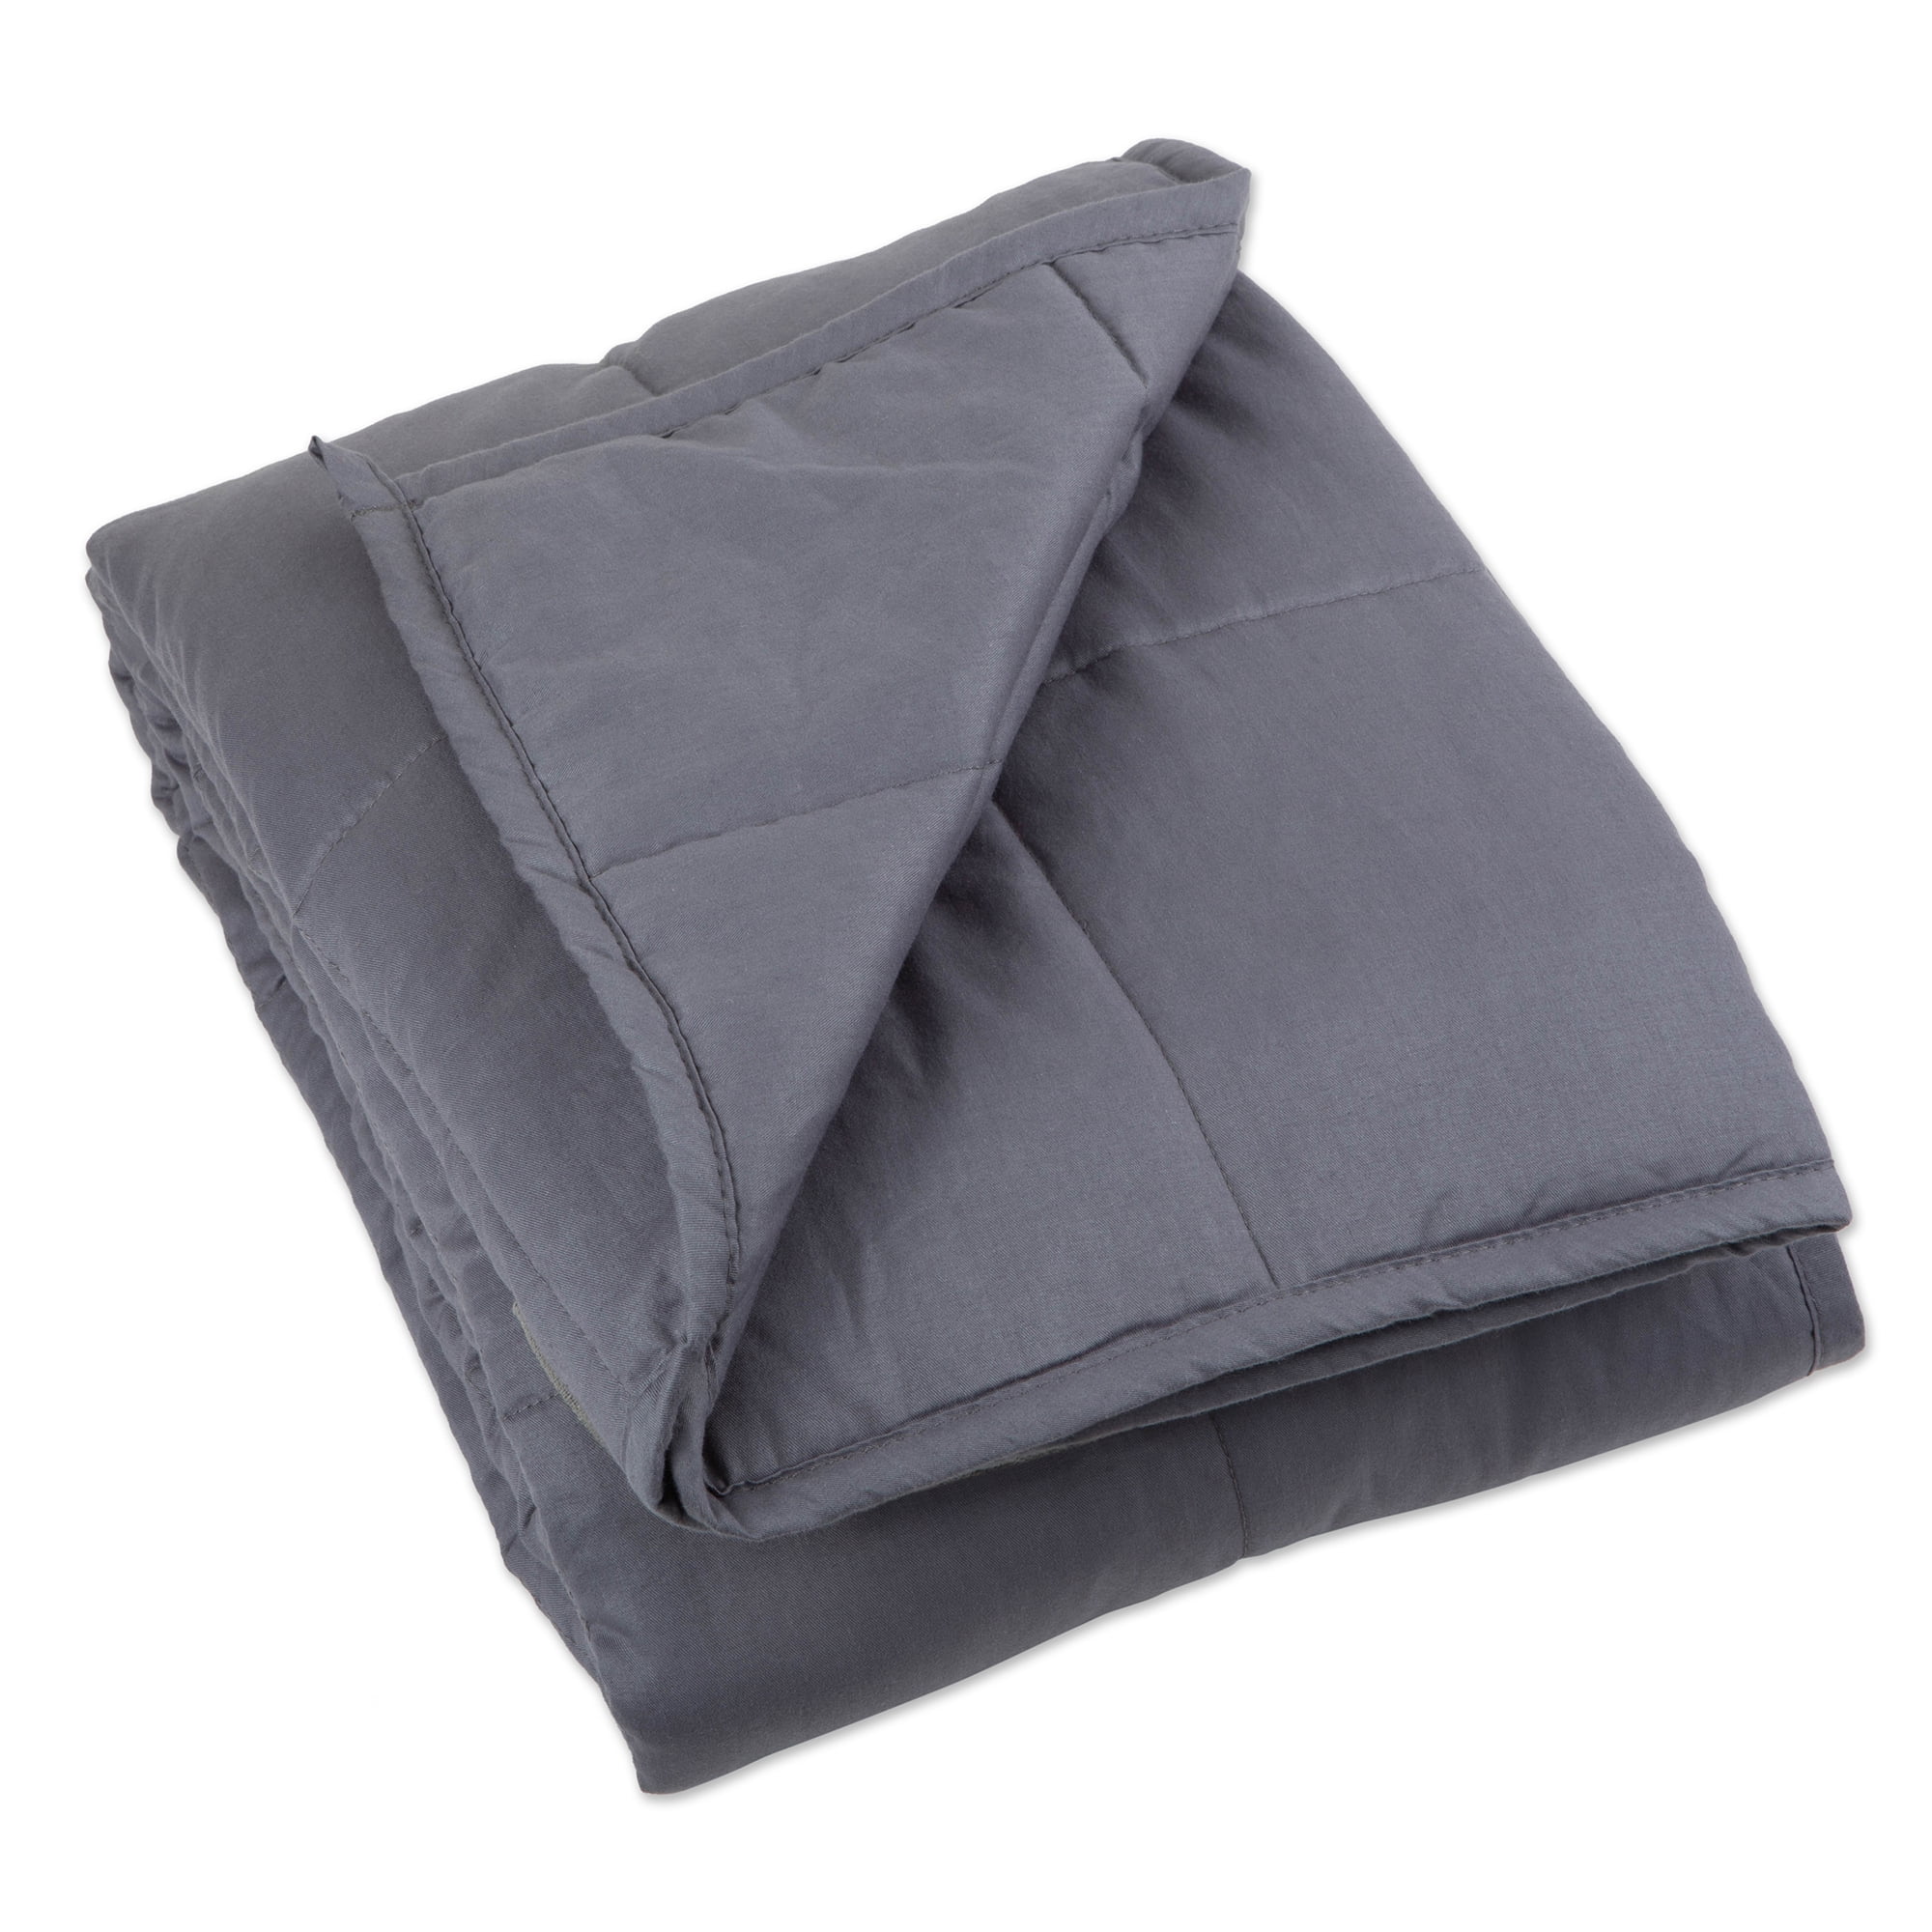 Z02280 10 Lbs Weighted Blanket, Grey - 41 X 60 In.